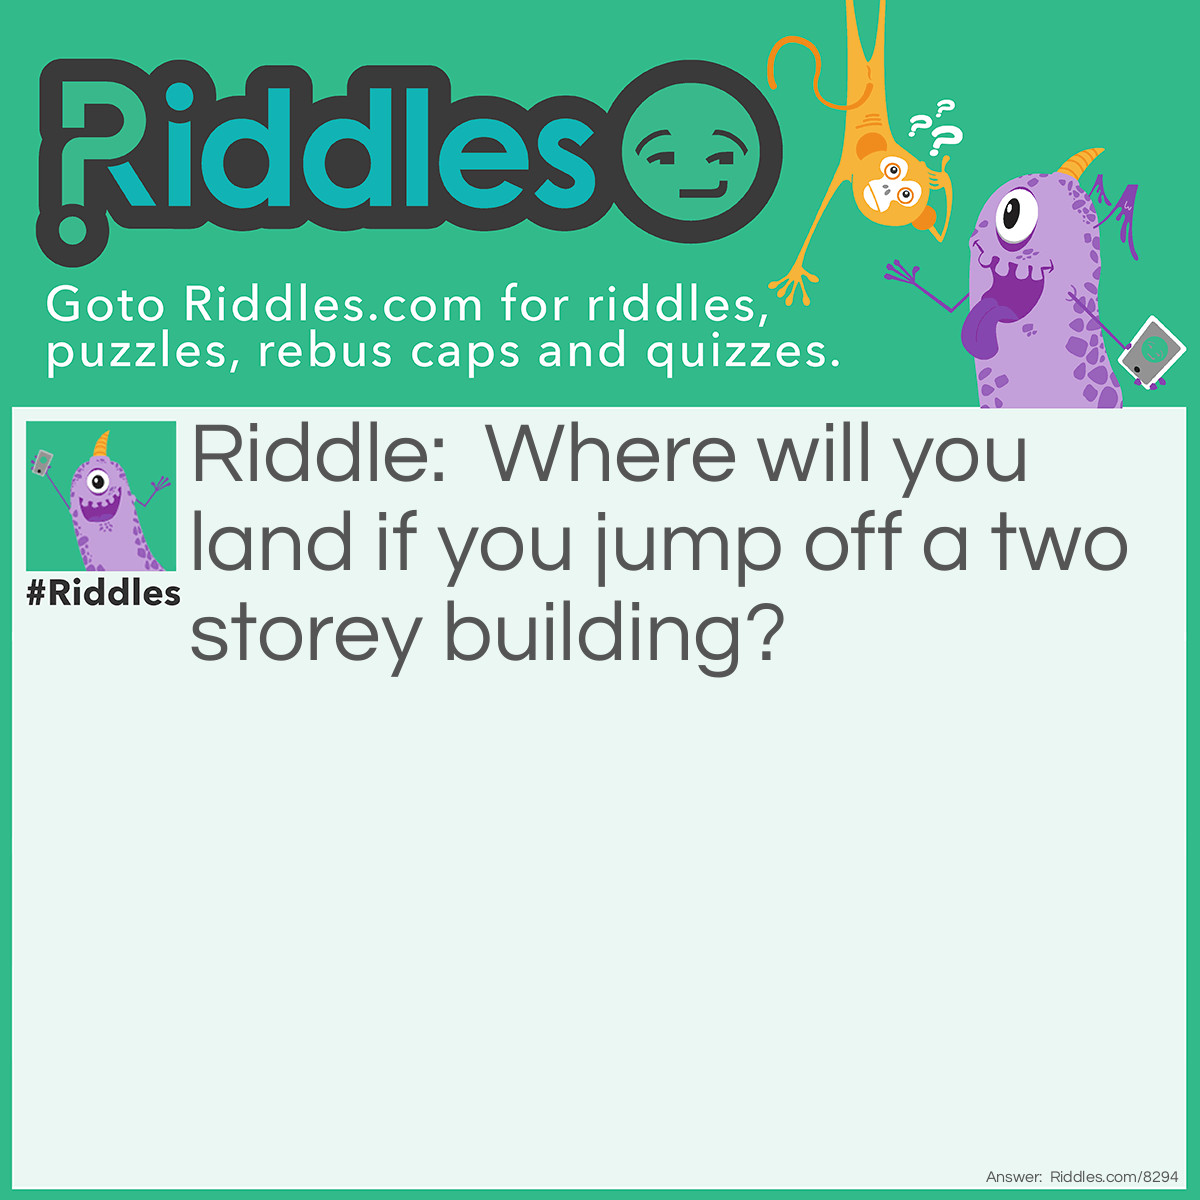 Riddle: Where will you land if you jump off a two storey building? Answer: In the hospital.